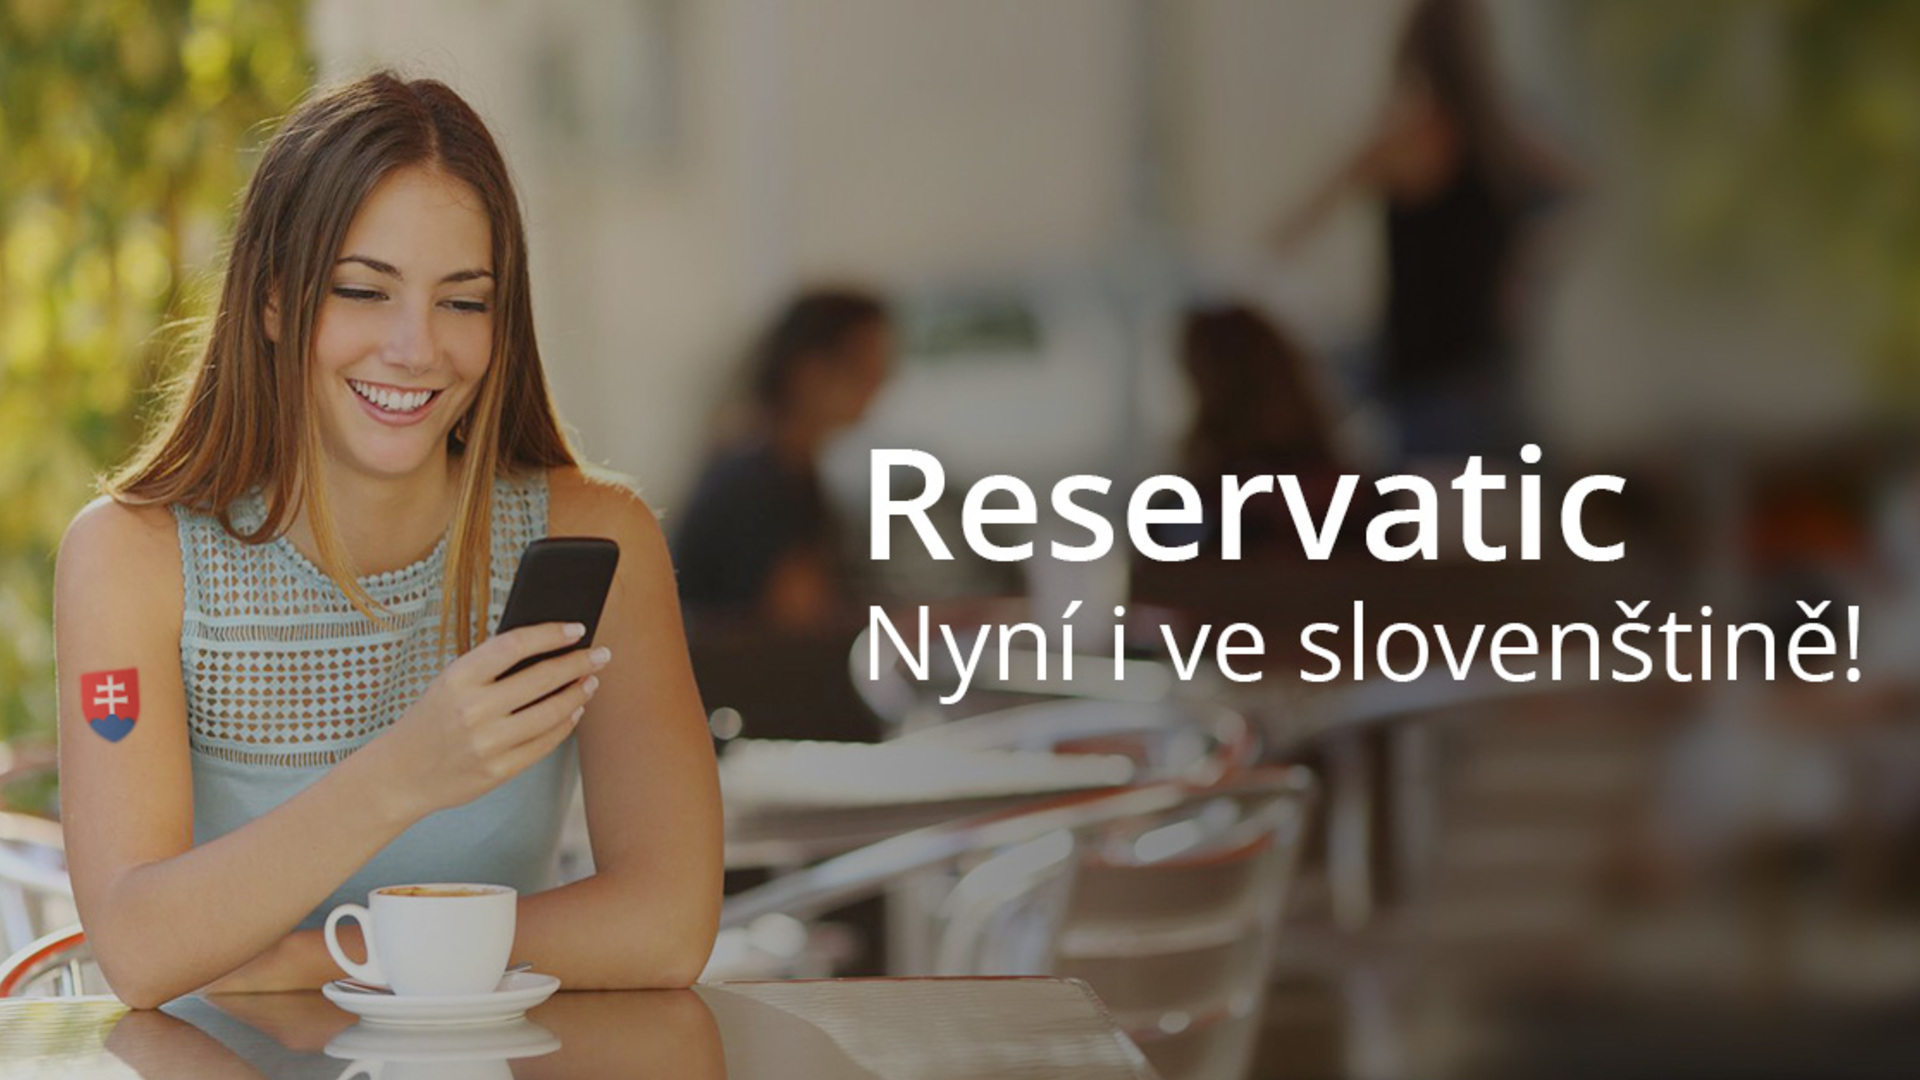  Reservatic is now in Slovak